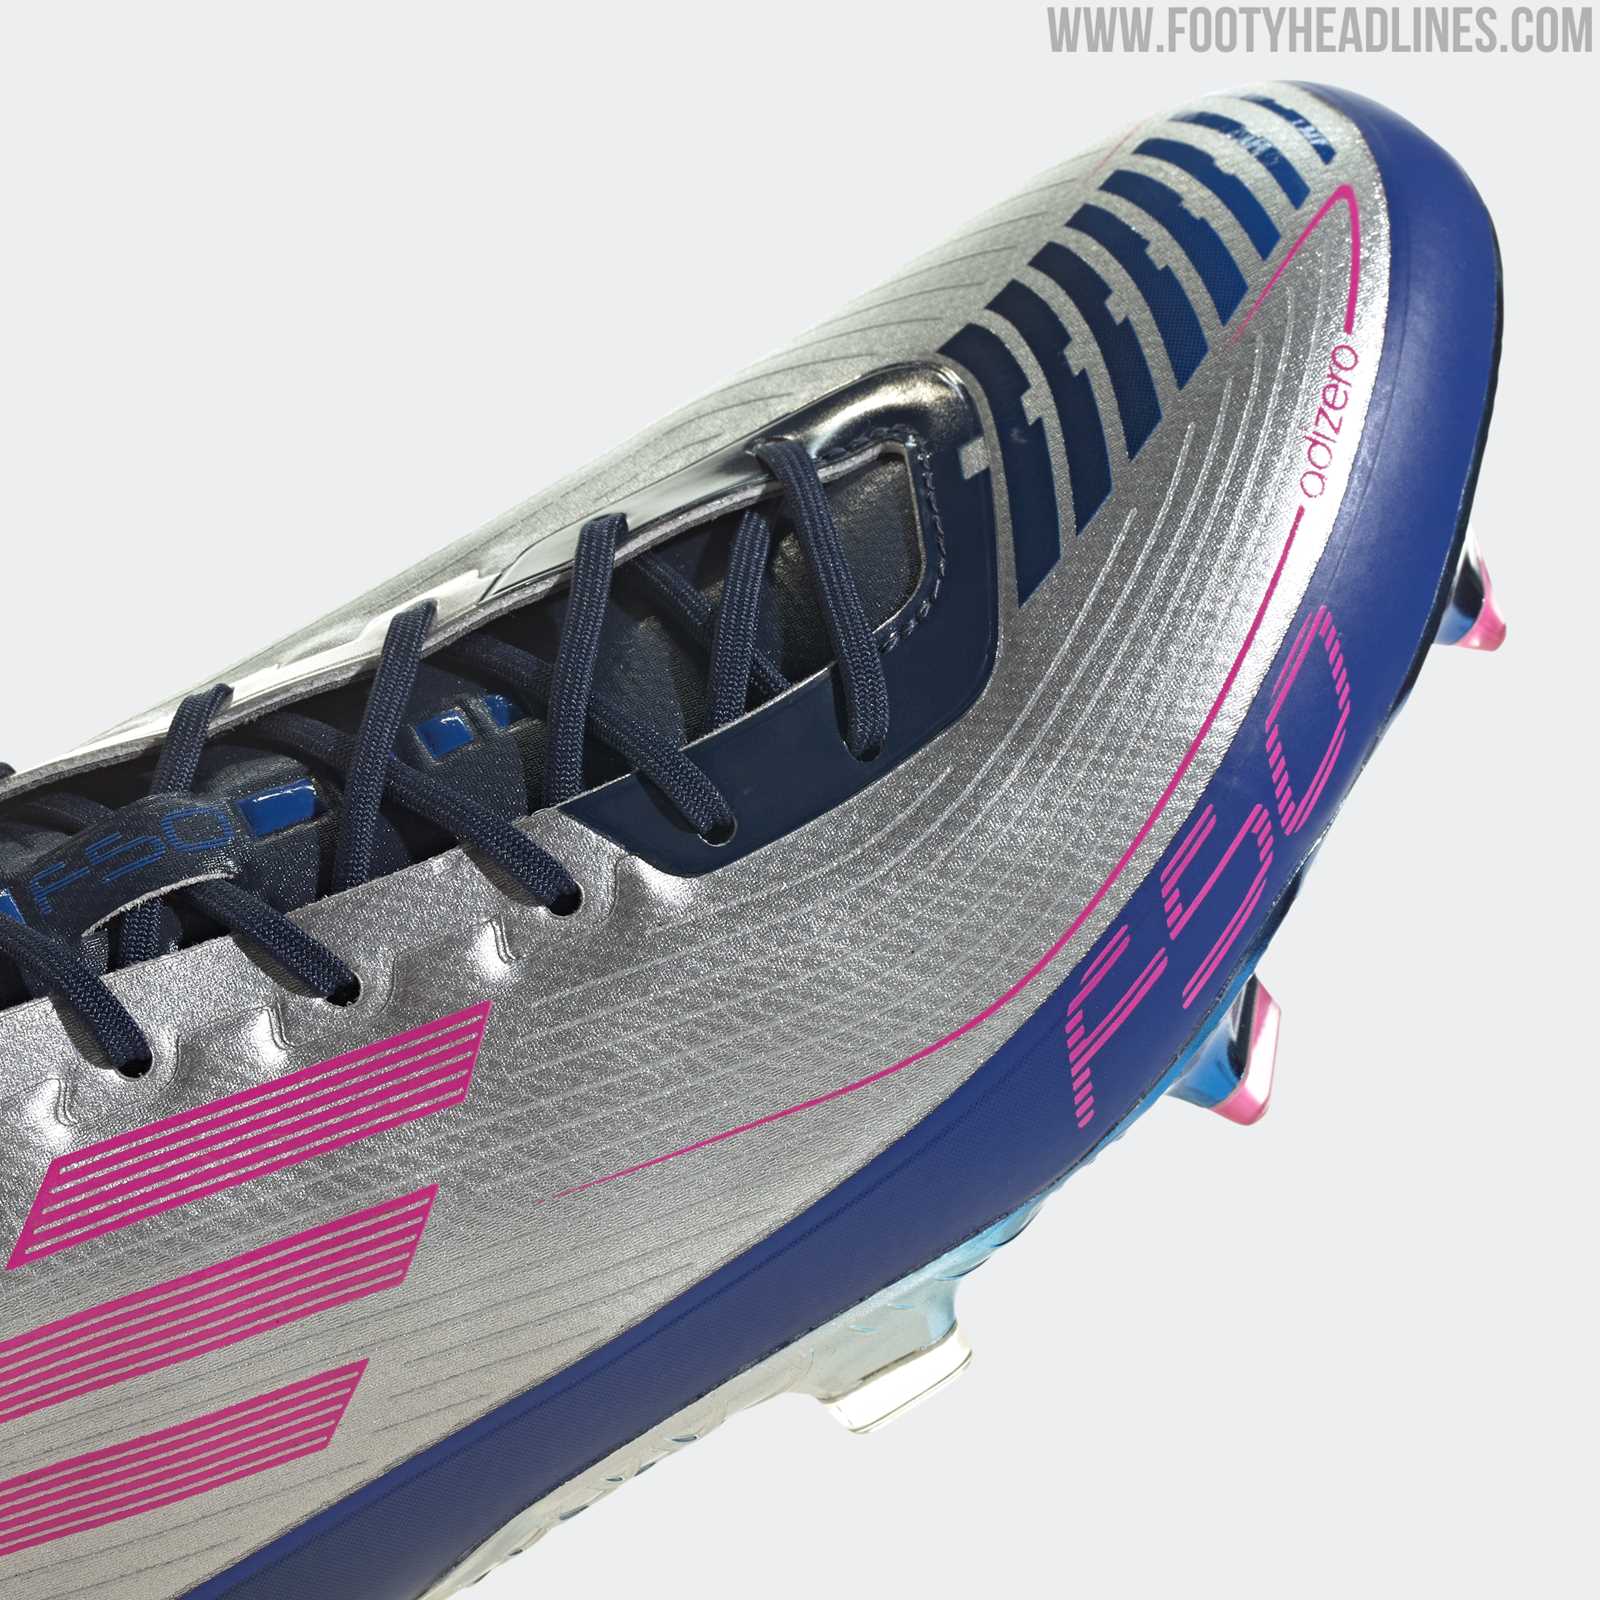 Adidas F50 Champions League Boots Released - Footy Headlines